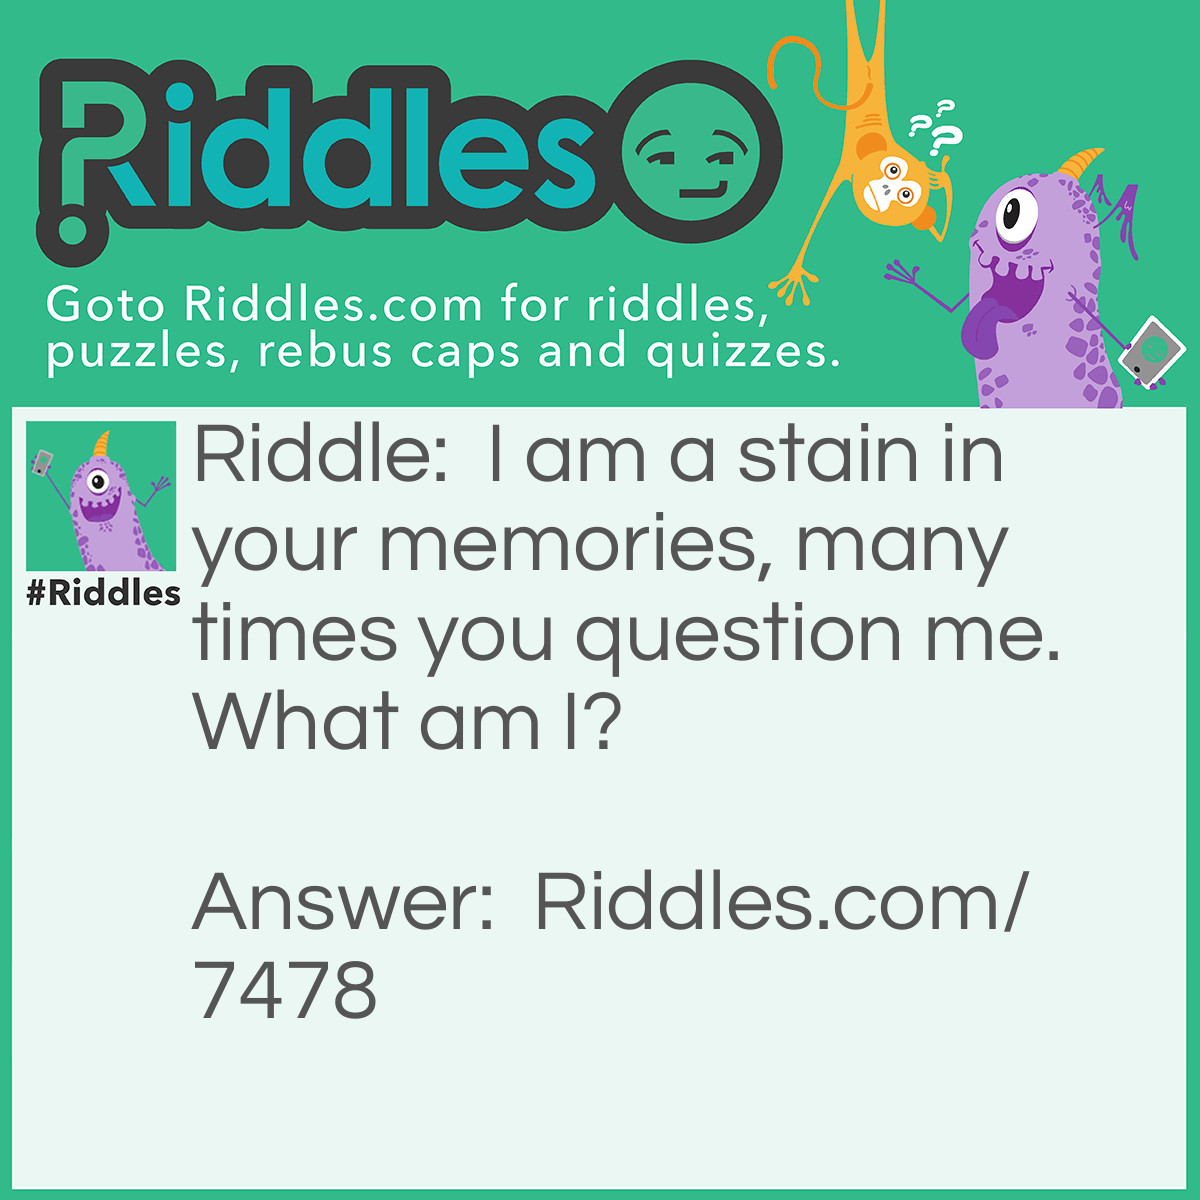 Riddle: I am a stain in your memories, many times you question me. What am I? Answer: I am your past.